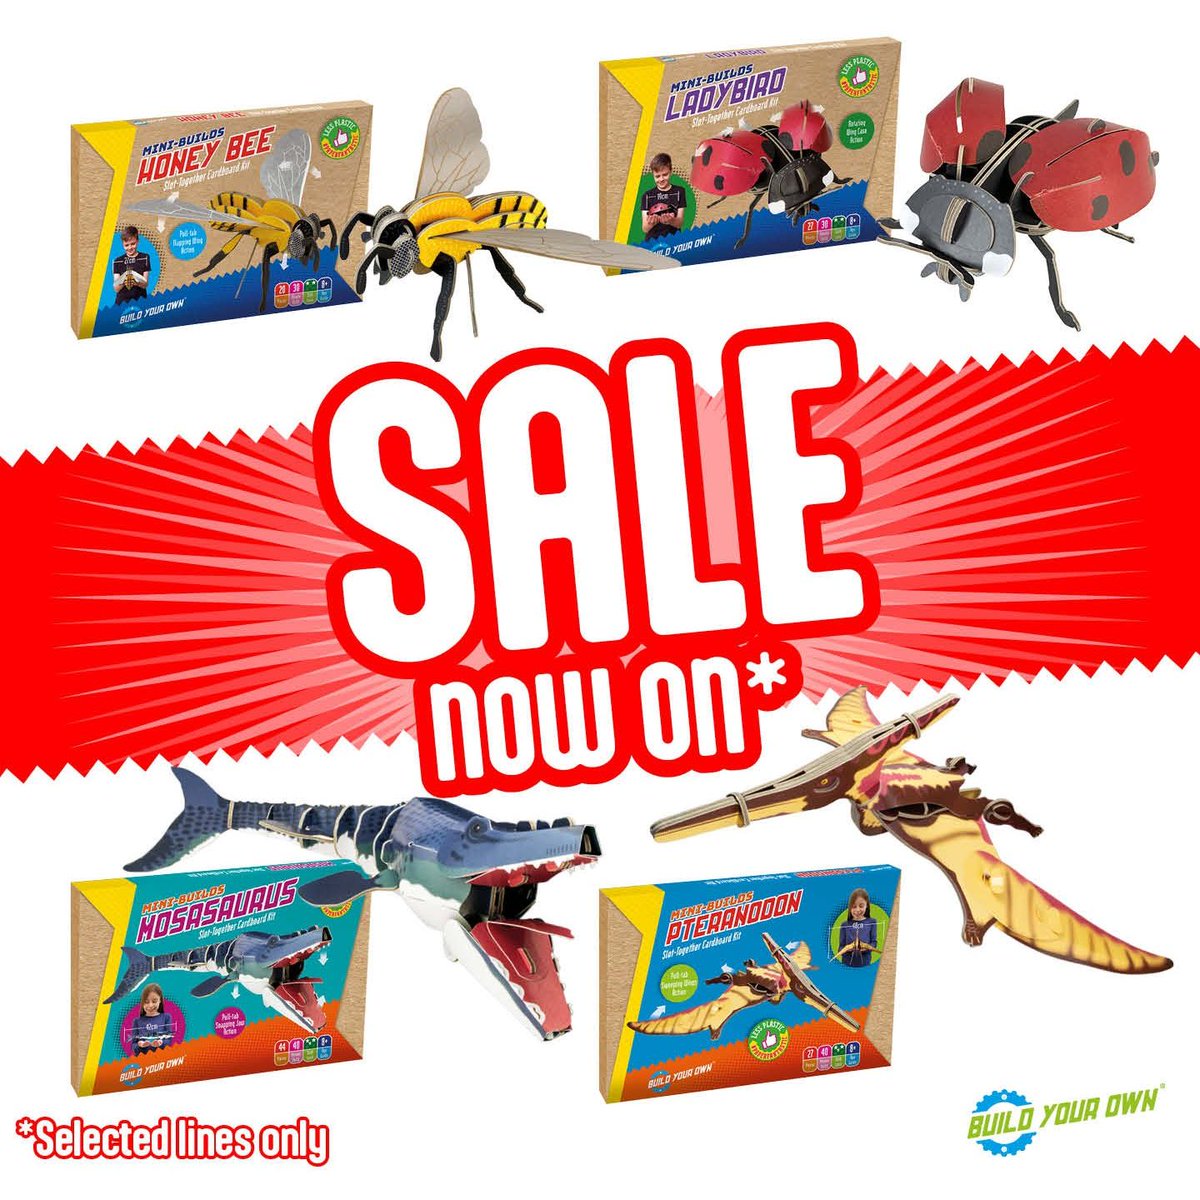 Don’t miss out on some top Mini Build kits in our New Year sale 🎉 🌟 Just £7.99 until 31st Jan. Wow! 👉 Head to the SALE link in our bio to shop our January offers. Go, go, go! Available while stocks last. #newyearsale #toysale #stemtoys